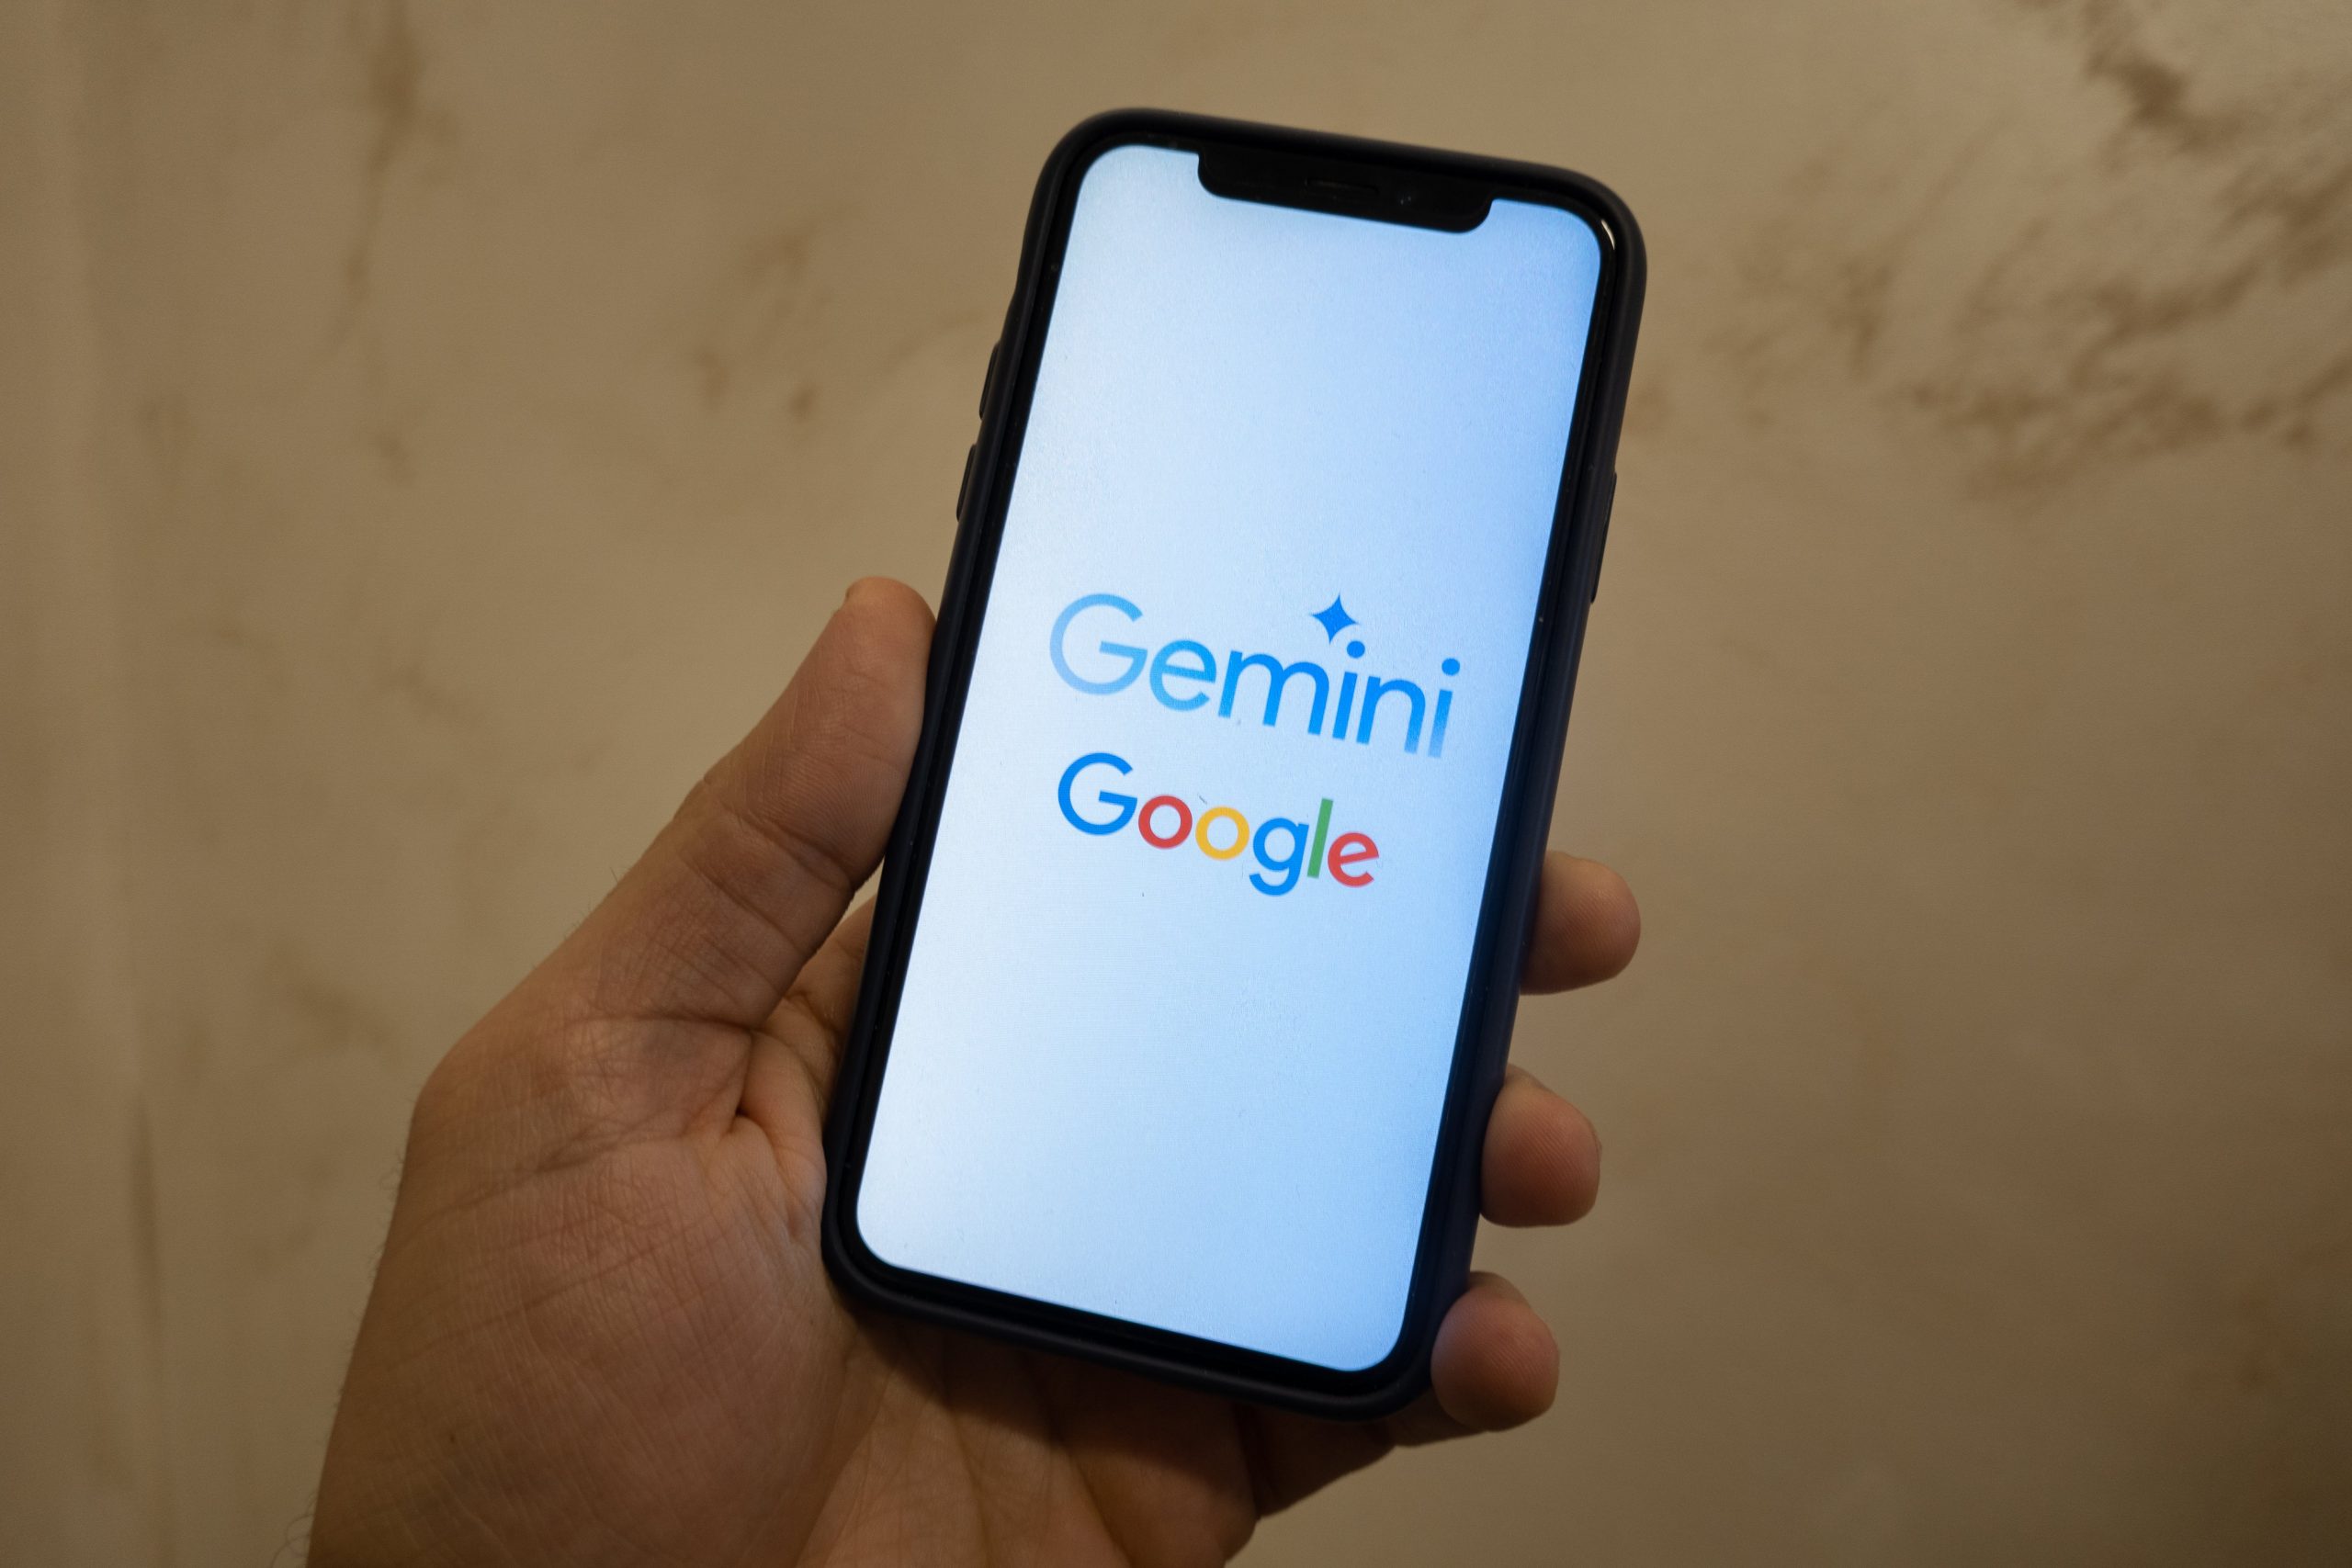 A smartphone showing the Goole and Gemini logos